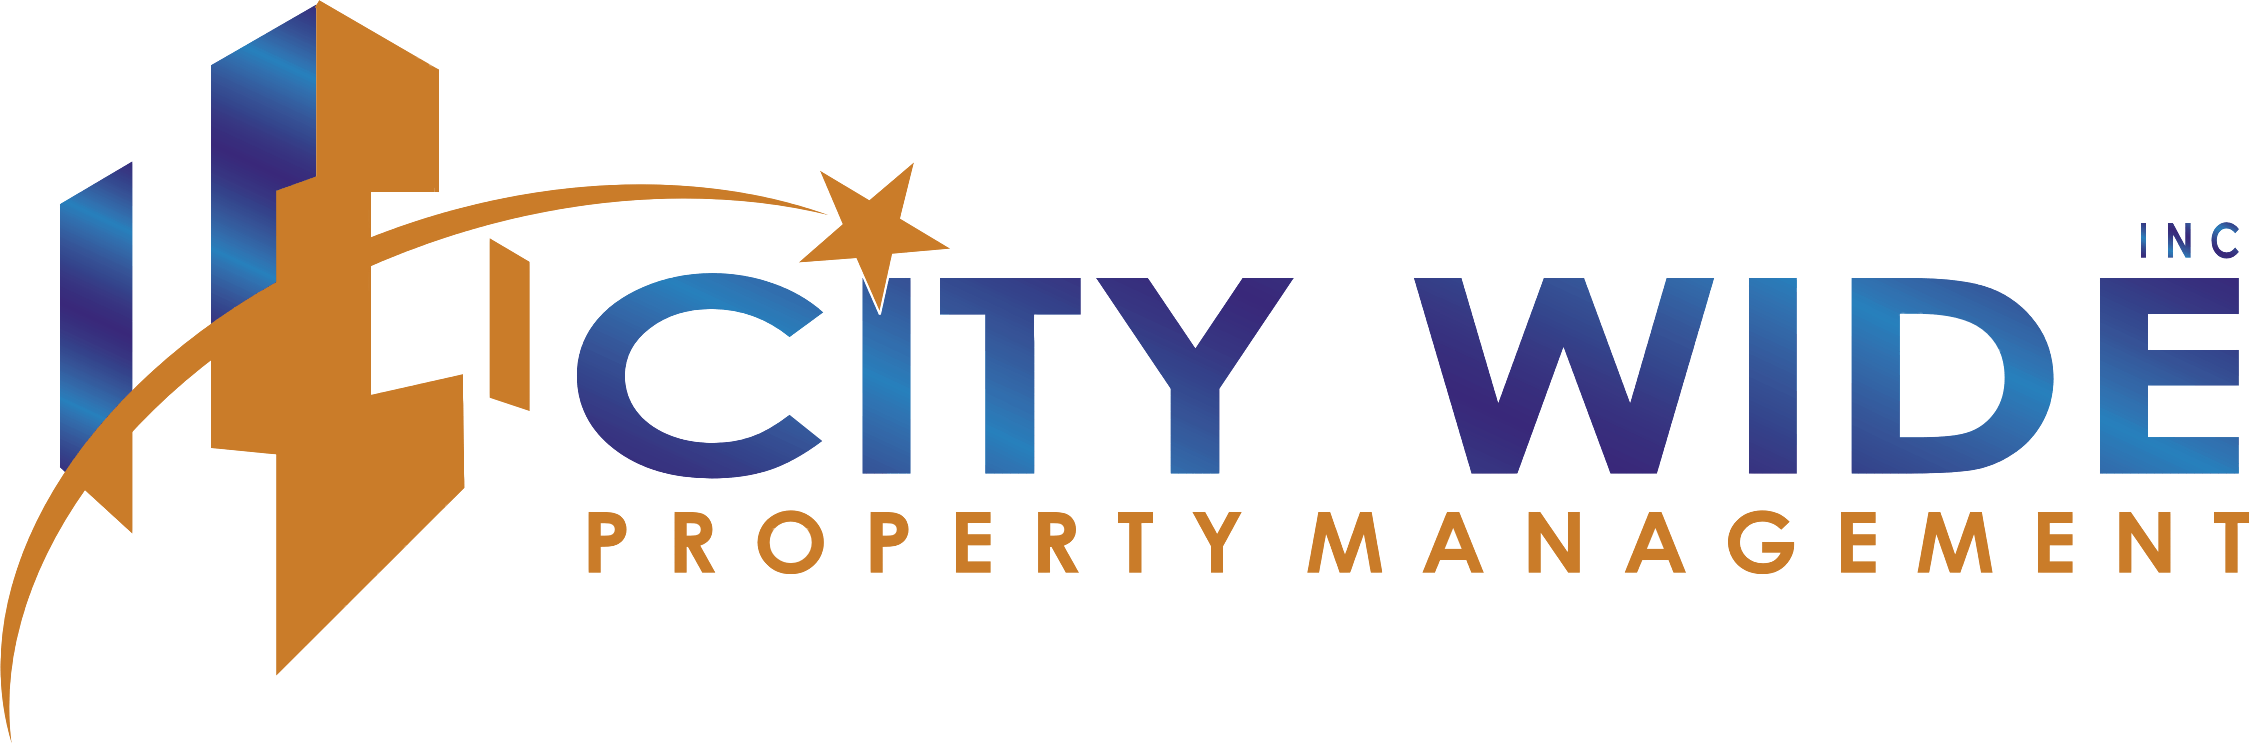 City Wide Property Management We offer our tenant